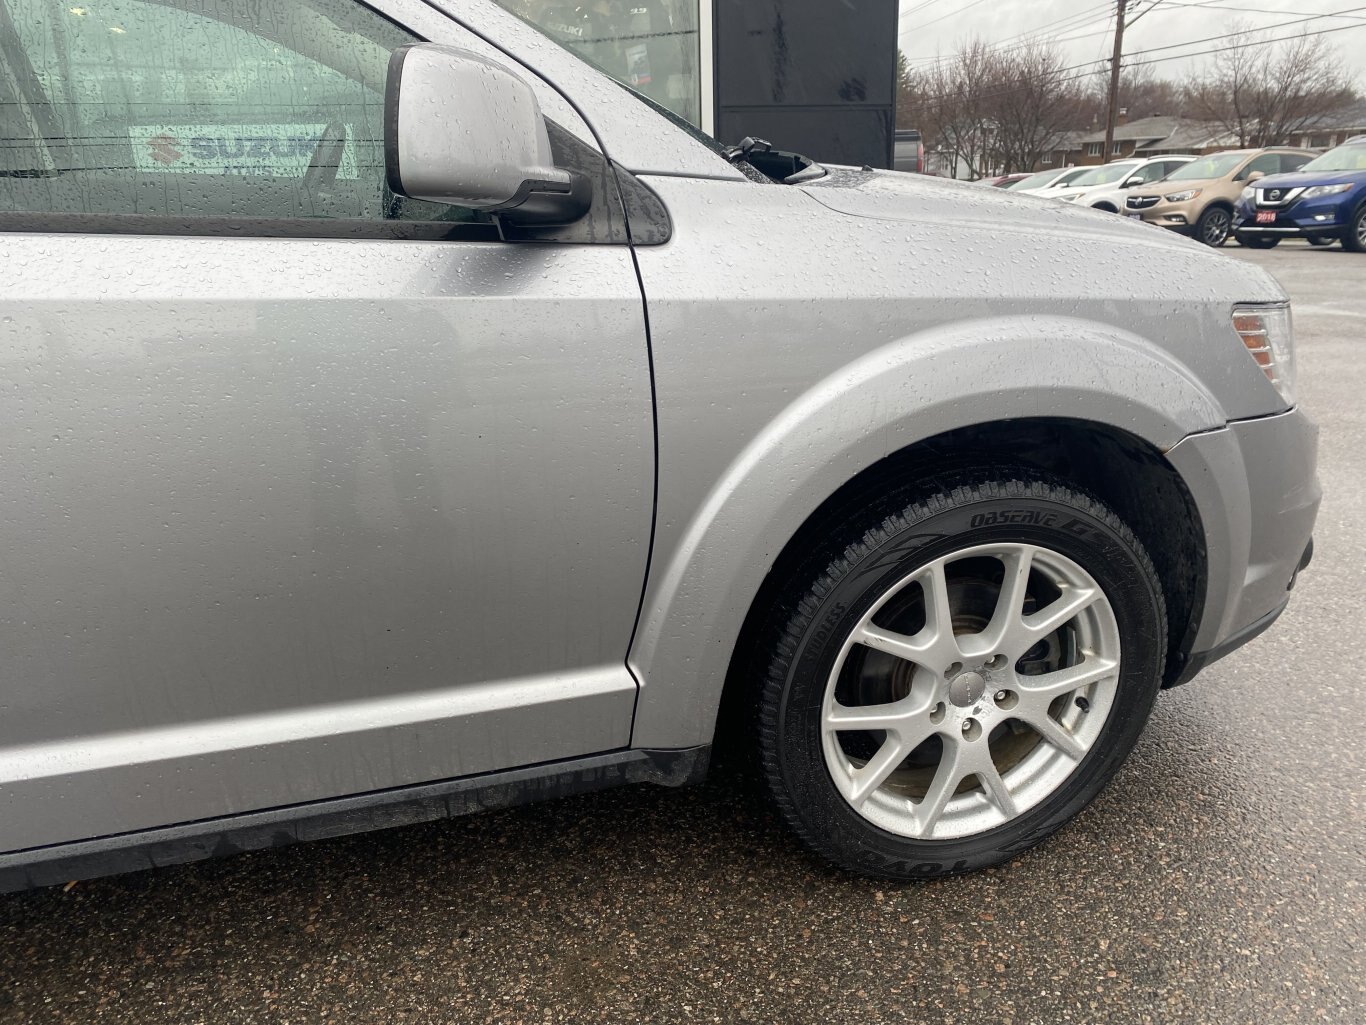 2016 DODGE JOURNEY R/T AWD WITH LEATHER SEATS, HEATED SEATS AND REAR VIEW CAMERA!!